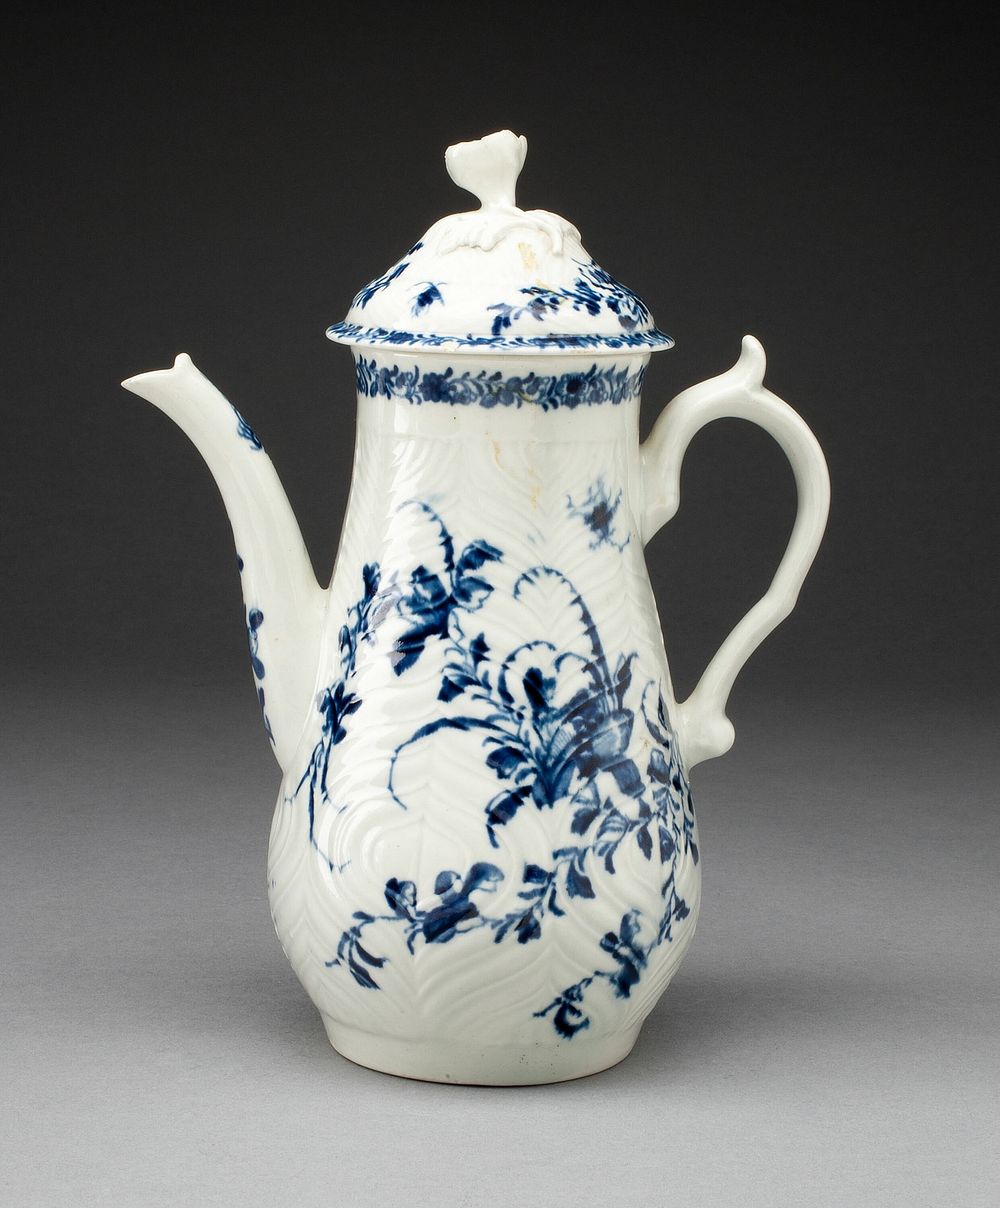 Coffee Pot by Worcester Porcelain Factory (Manufacturer)